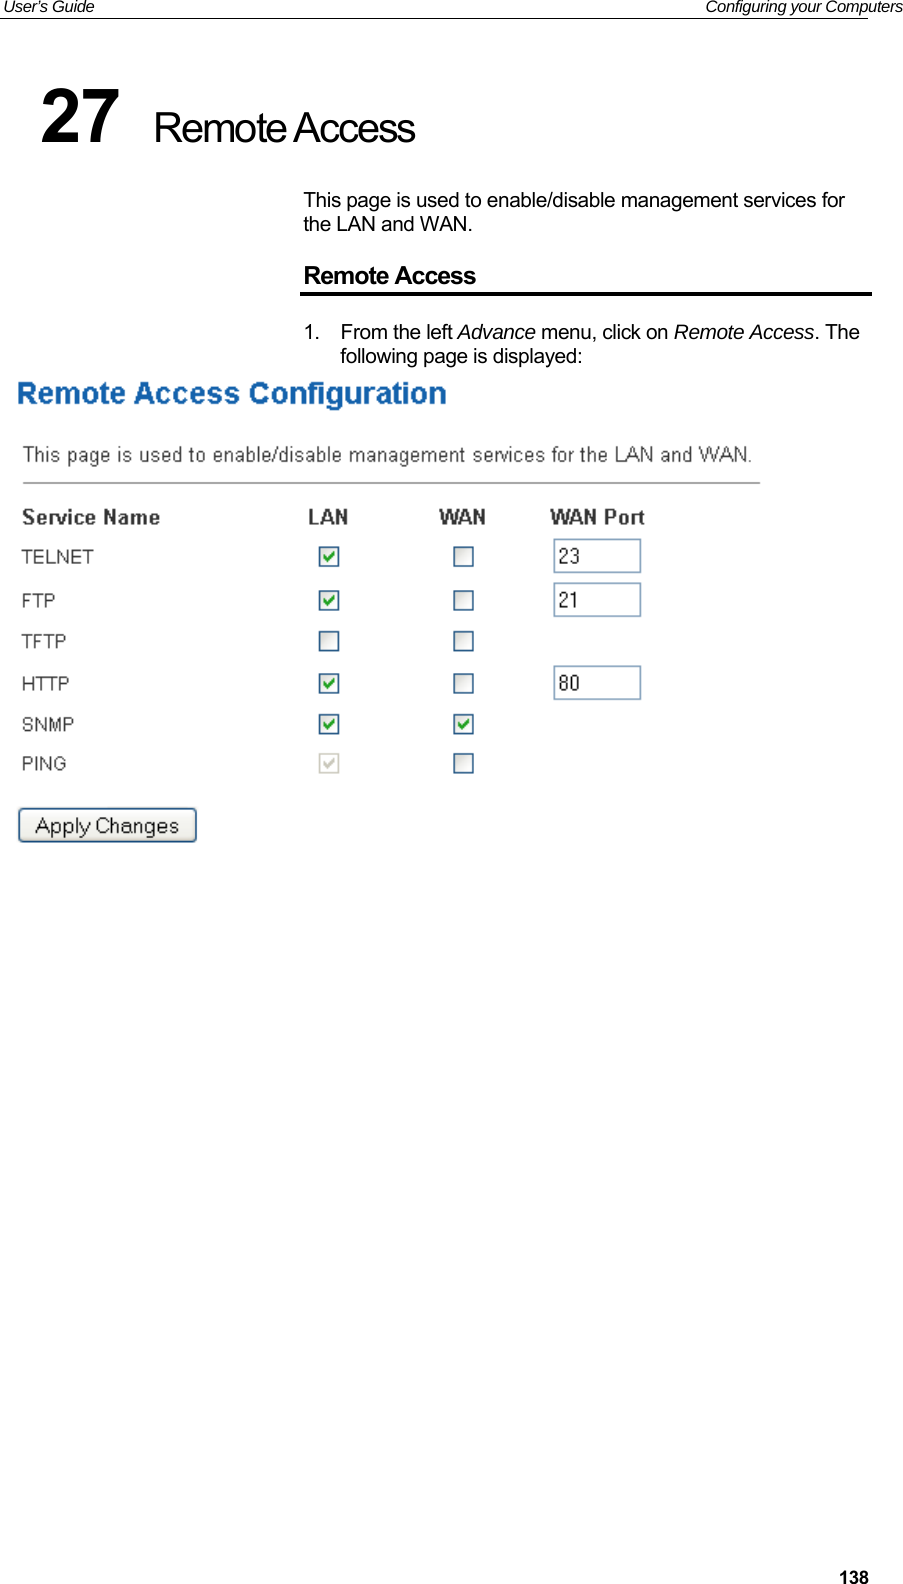 User’s Guide   Configuring your Computers  13827  Remote Access This page is used to enable/disable management services for the LAN and WAN. Remote Access 1.  From the left Advance menu, click on Remote Access. The following page is displayed:                      